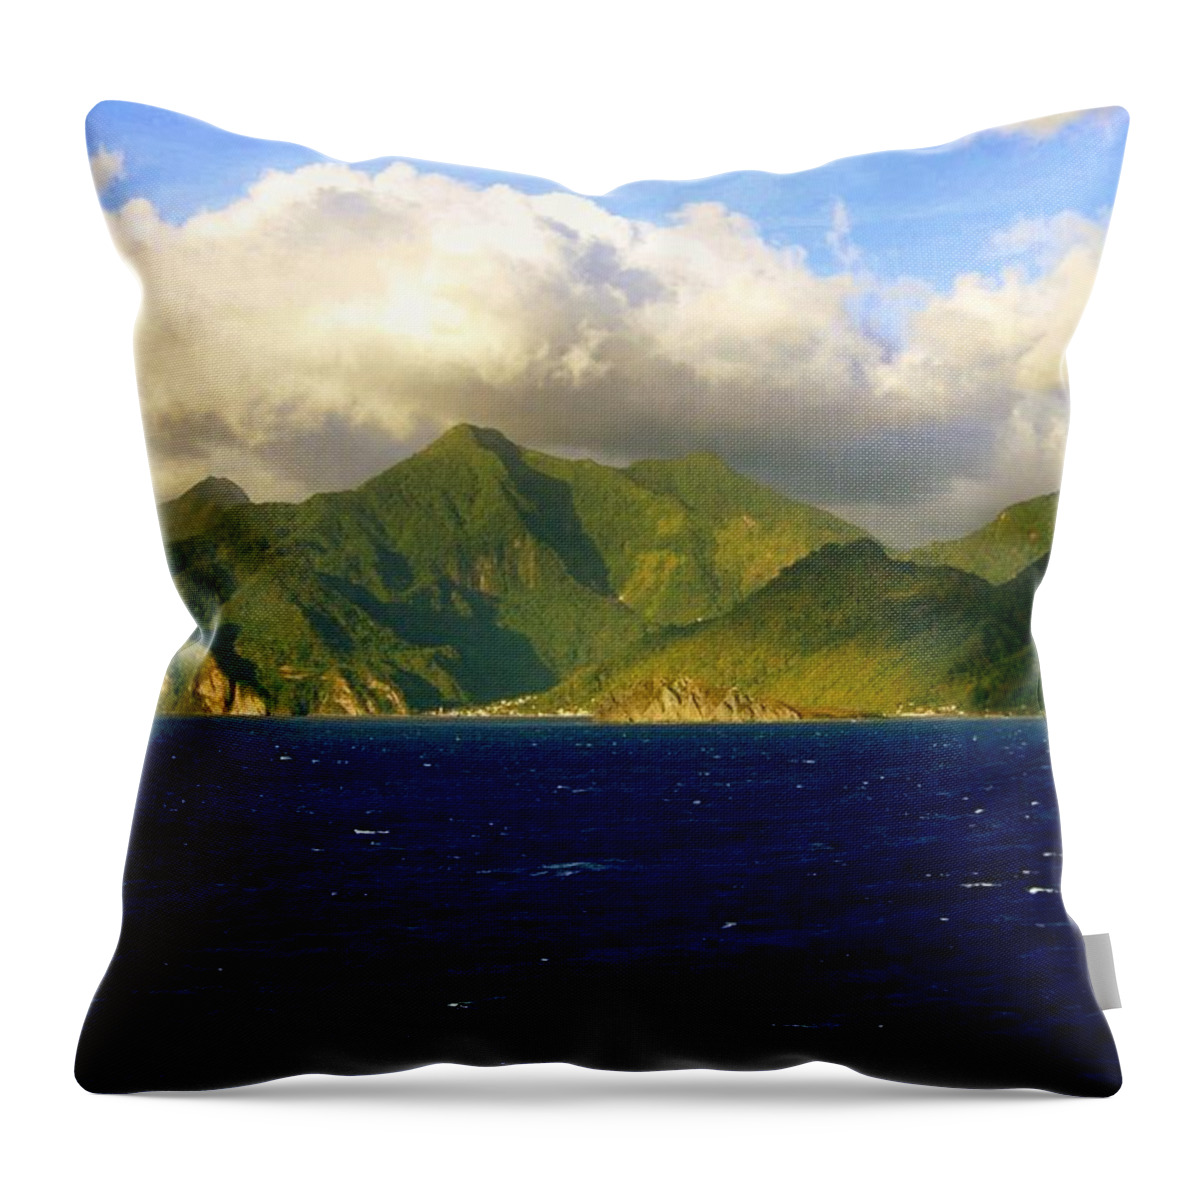 Landscapes Throw Pillow featuring the photograph Sailing Take Me Away by Karen Wiles